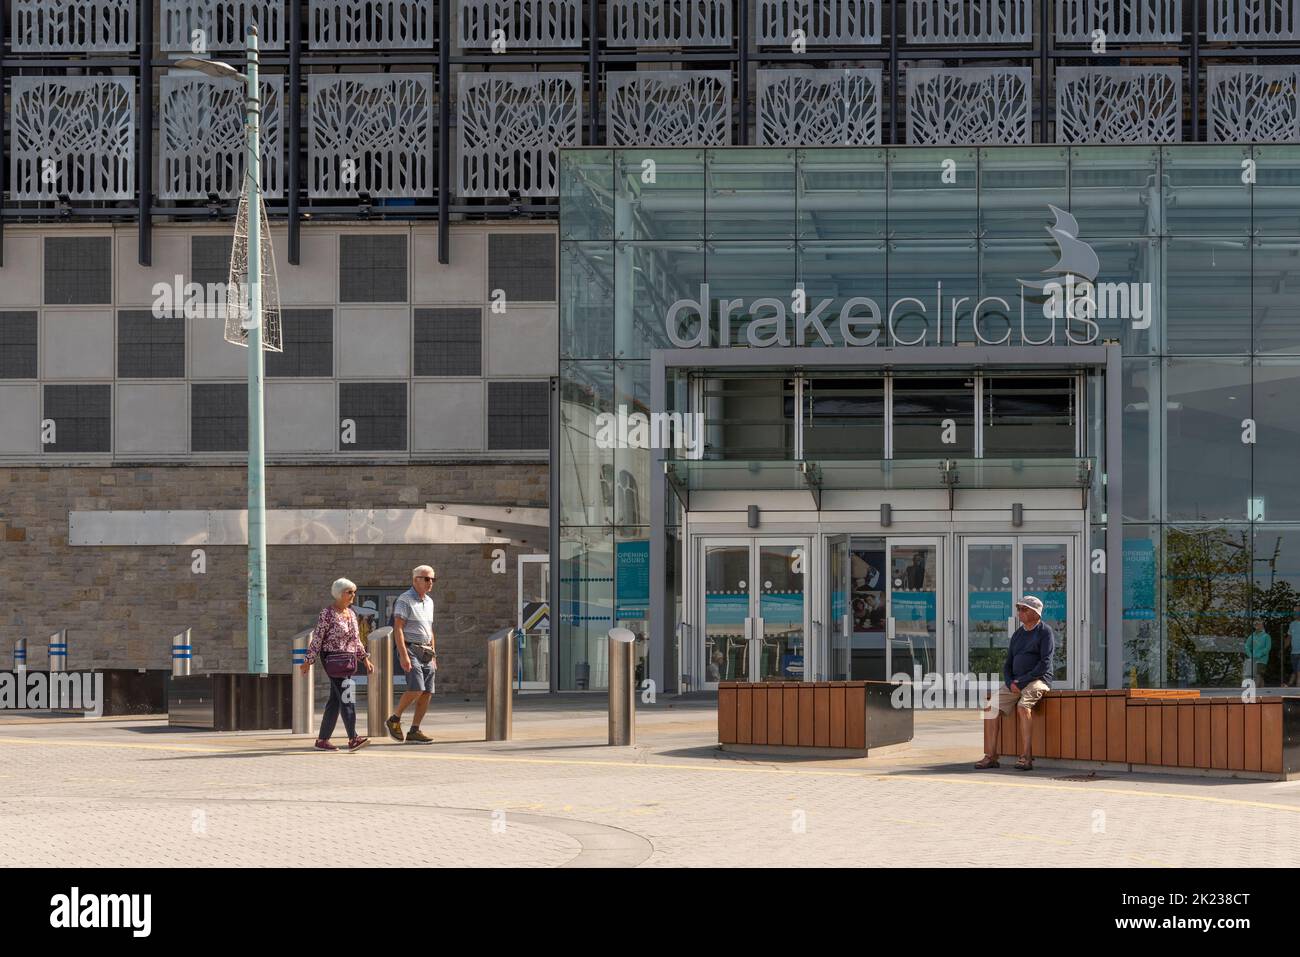 Plymouth, Devon, England, UK. 2022. The Drake Circus building popular shopping and parking building in the city centre. Stock Photo